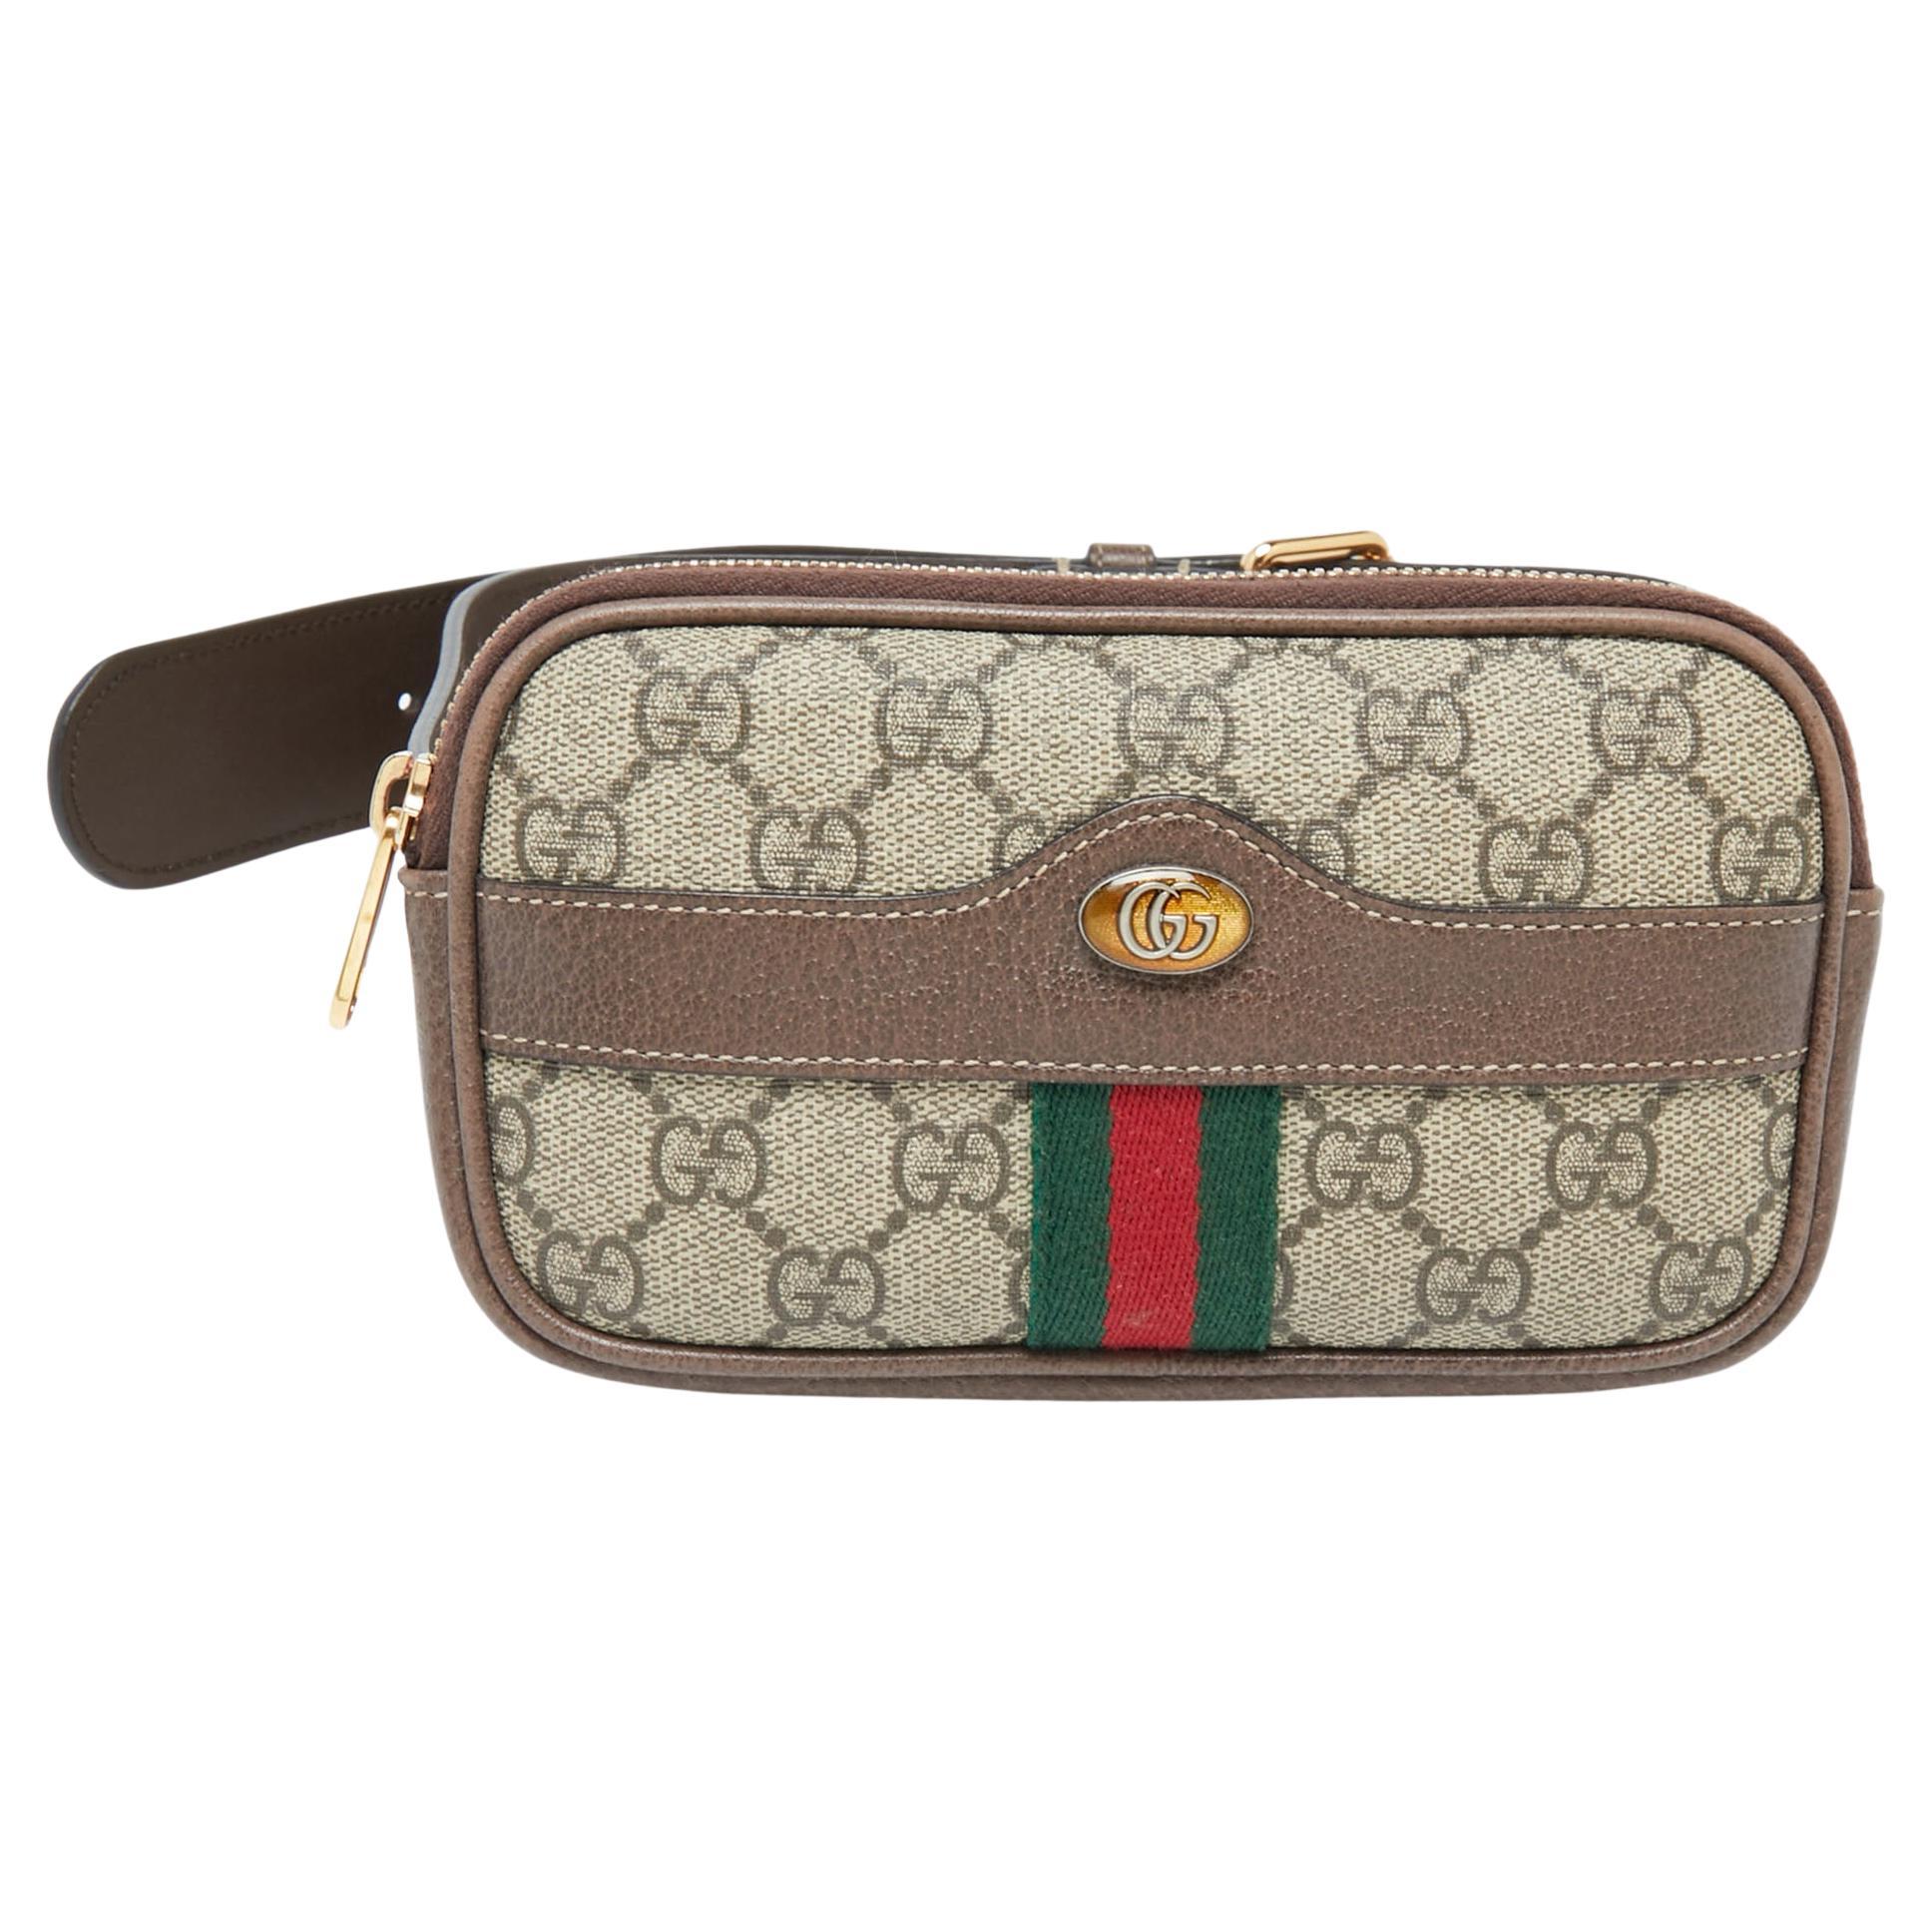 Gucci Key Pouch - 8 For Sale on 1stDibs  gucci key pouch black, gucci  ophidia key pouch, ophidia key pouch